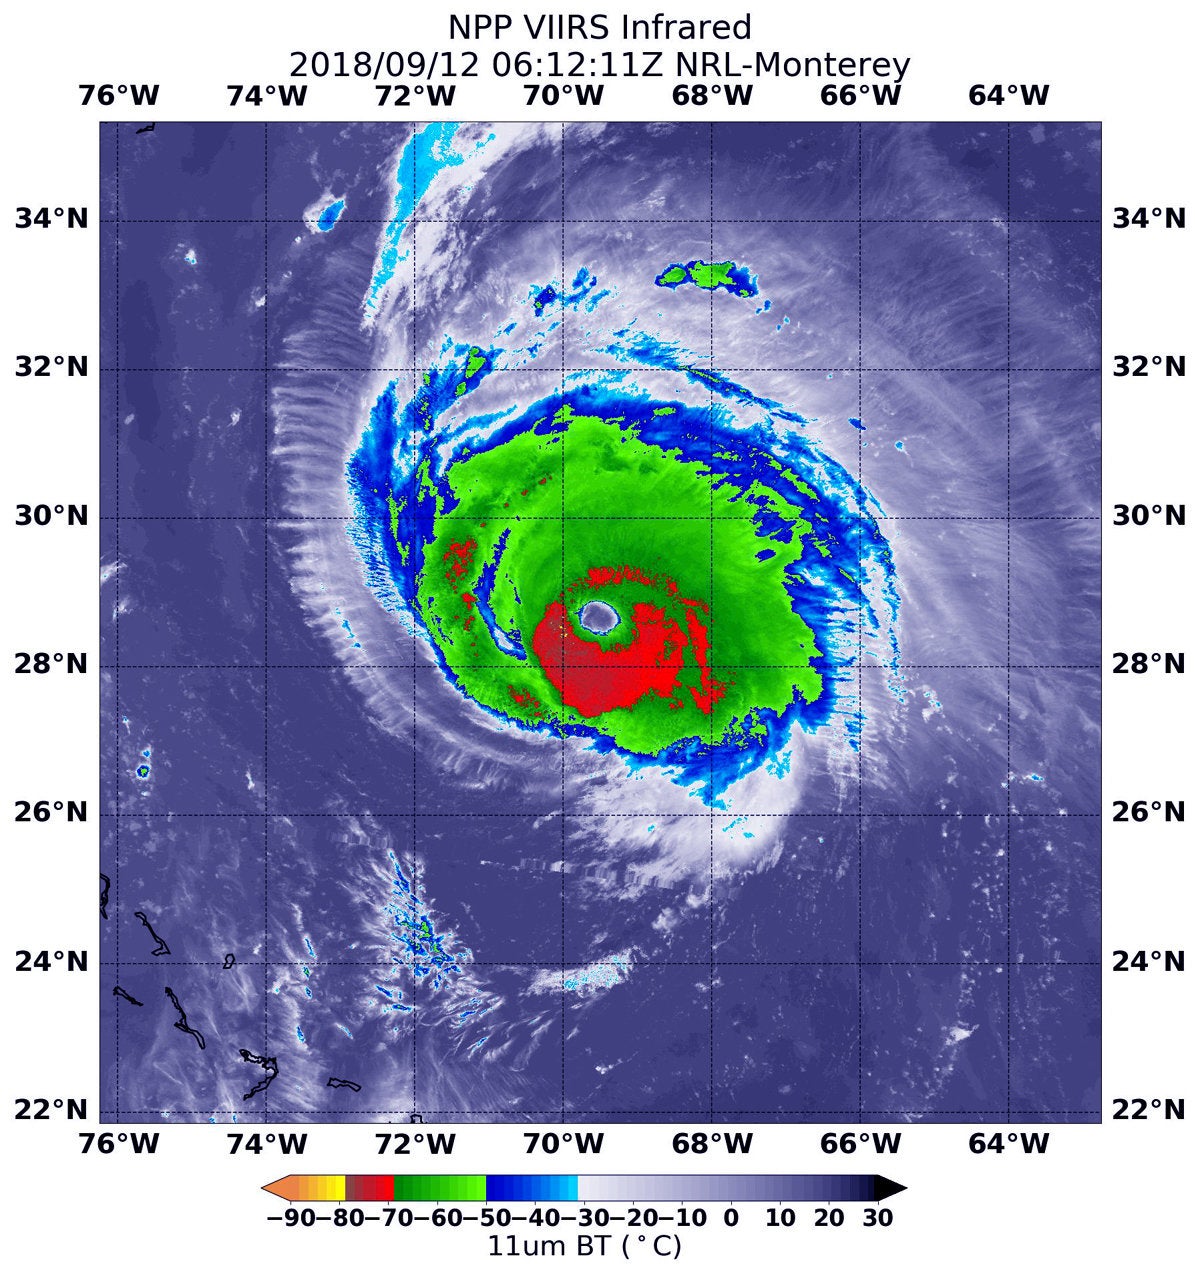 Infrared image of Hurricane Florence